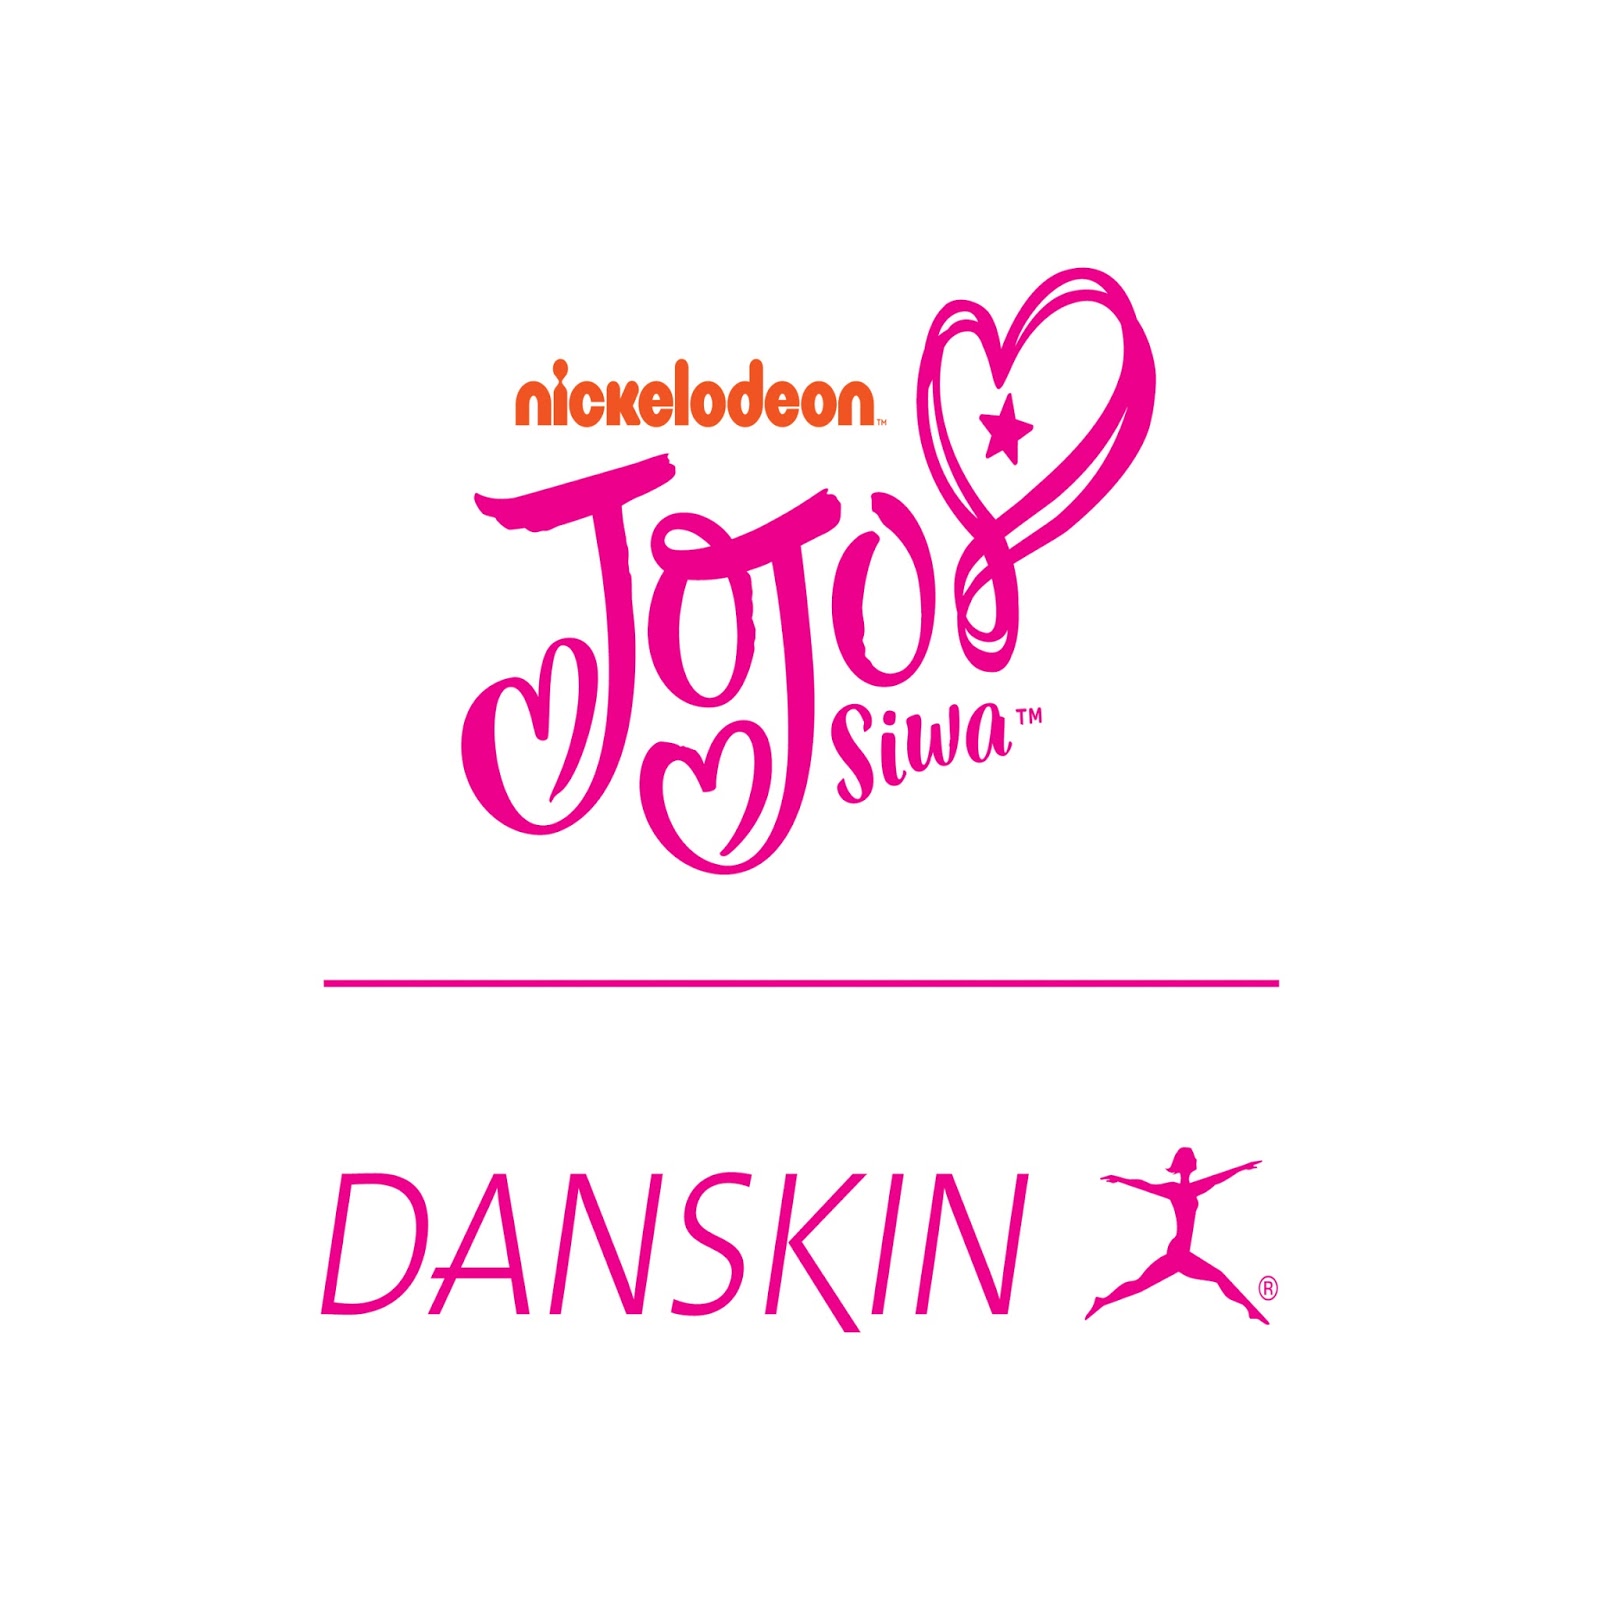 NickALive!: Nickelodeon Partners With Danskin To Launch Line Of Dance And  Athleisure Wear Inspired By JoJo Siwa *Added New Images*